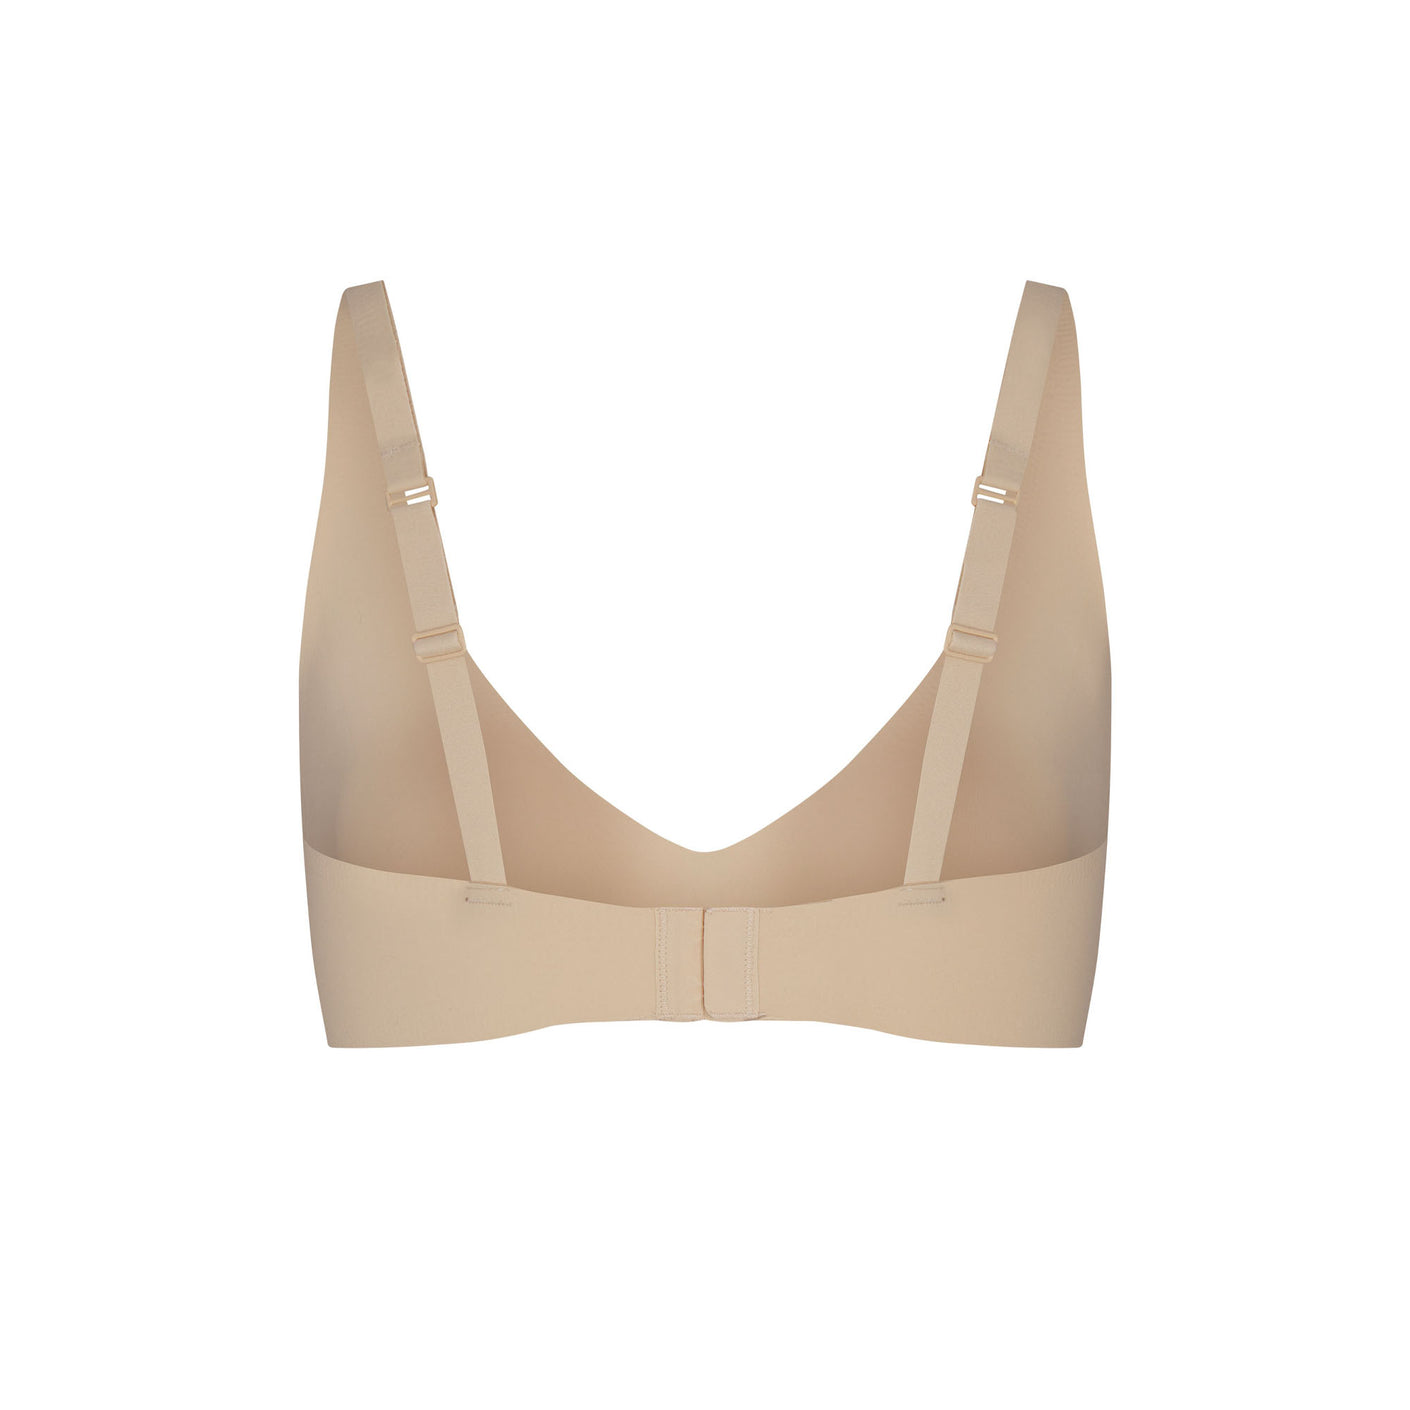 SKIMS Naked Plunge Bra 38B NWT Tan Size 38 B - $29 (62% Off Retail) New  With Tags - From Ali